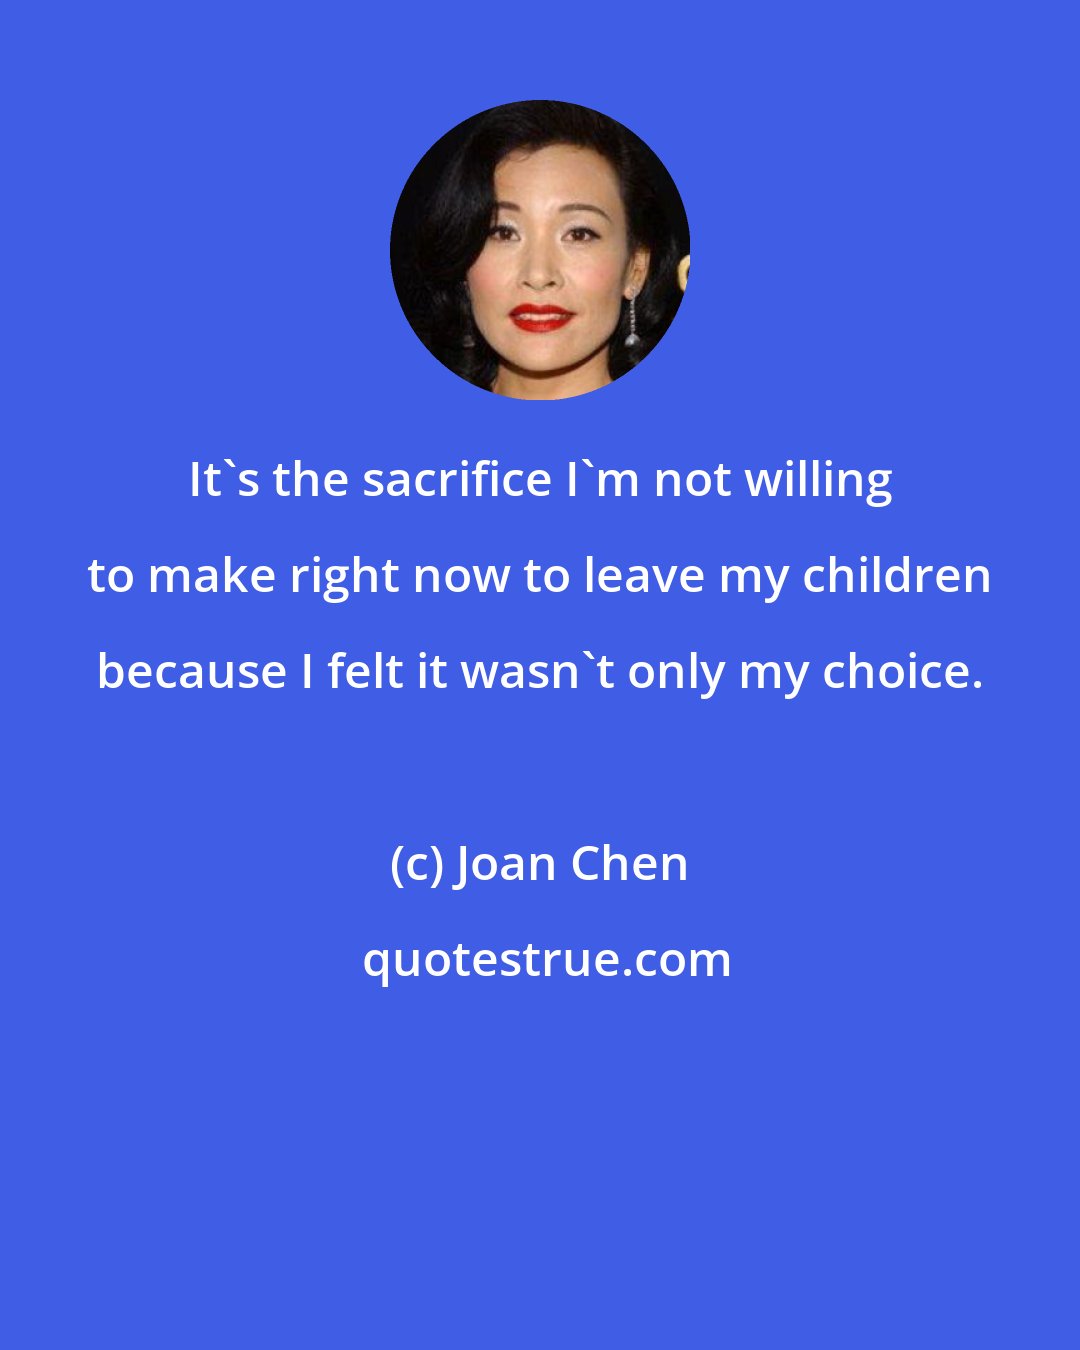 Joan Chen: It's the sacrifice I'm not willing to make right now to leave my children because I felt it wasn't only my choice.